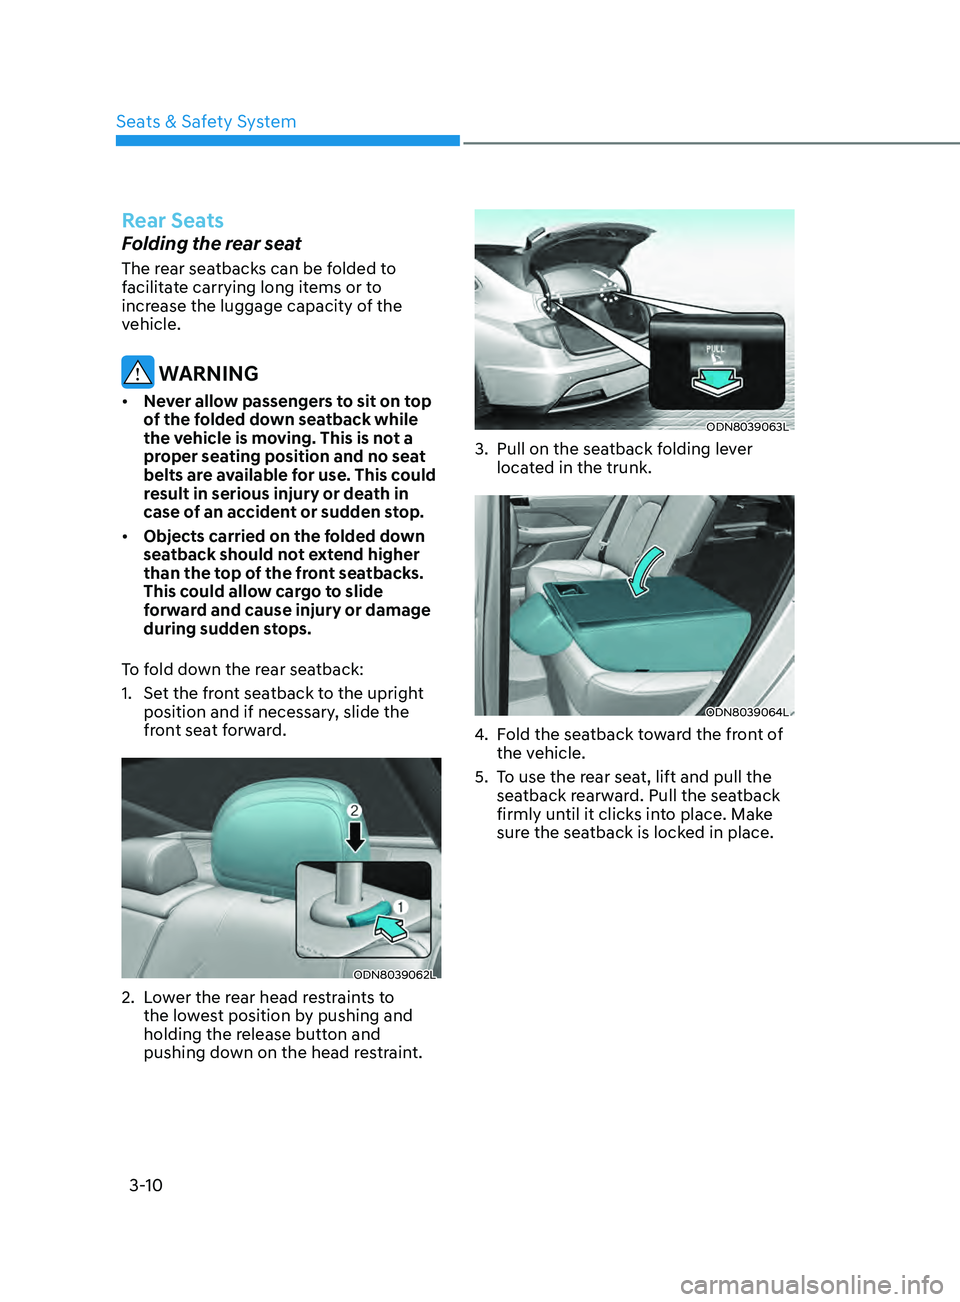 HYUNDAI SONATA 2021  Owners Manual 3-10
Rear Seats
Folding the rear seat
The rear seatbacks can be folded to 
facilitate carrying long items or to 
increase the luggage capacity of the 
vehicle.
 WARNING
•	Never allow passengers to s